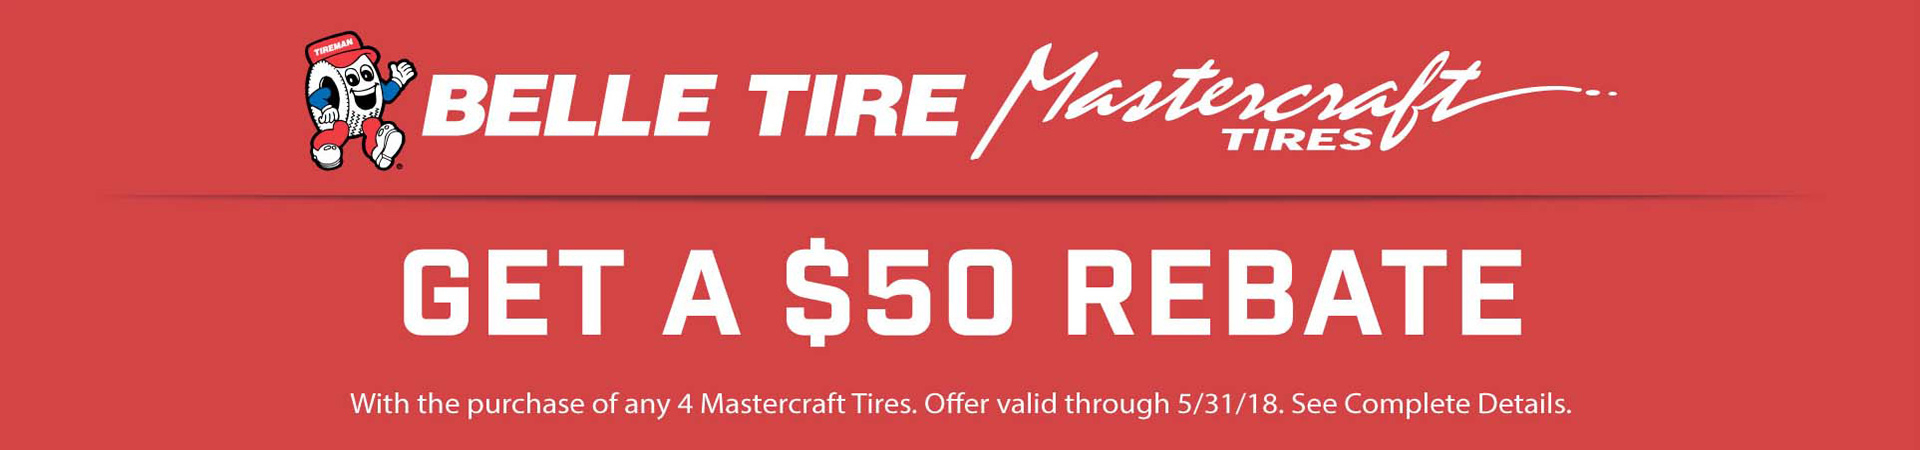 Belle Tire Tire Coupons Manufacturer Rebates